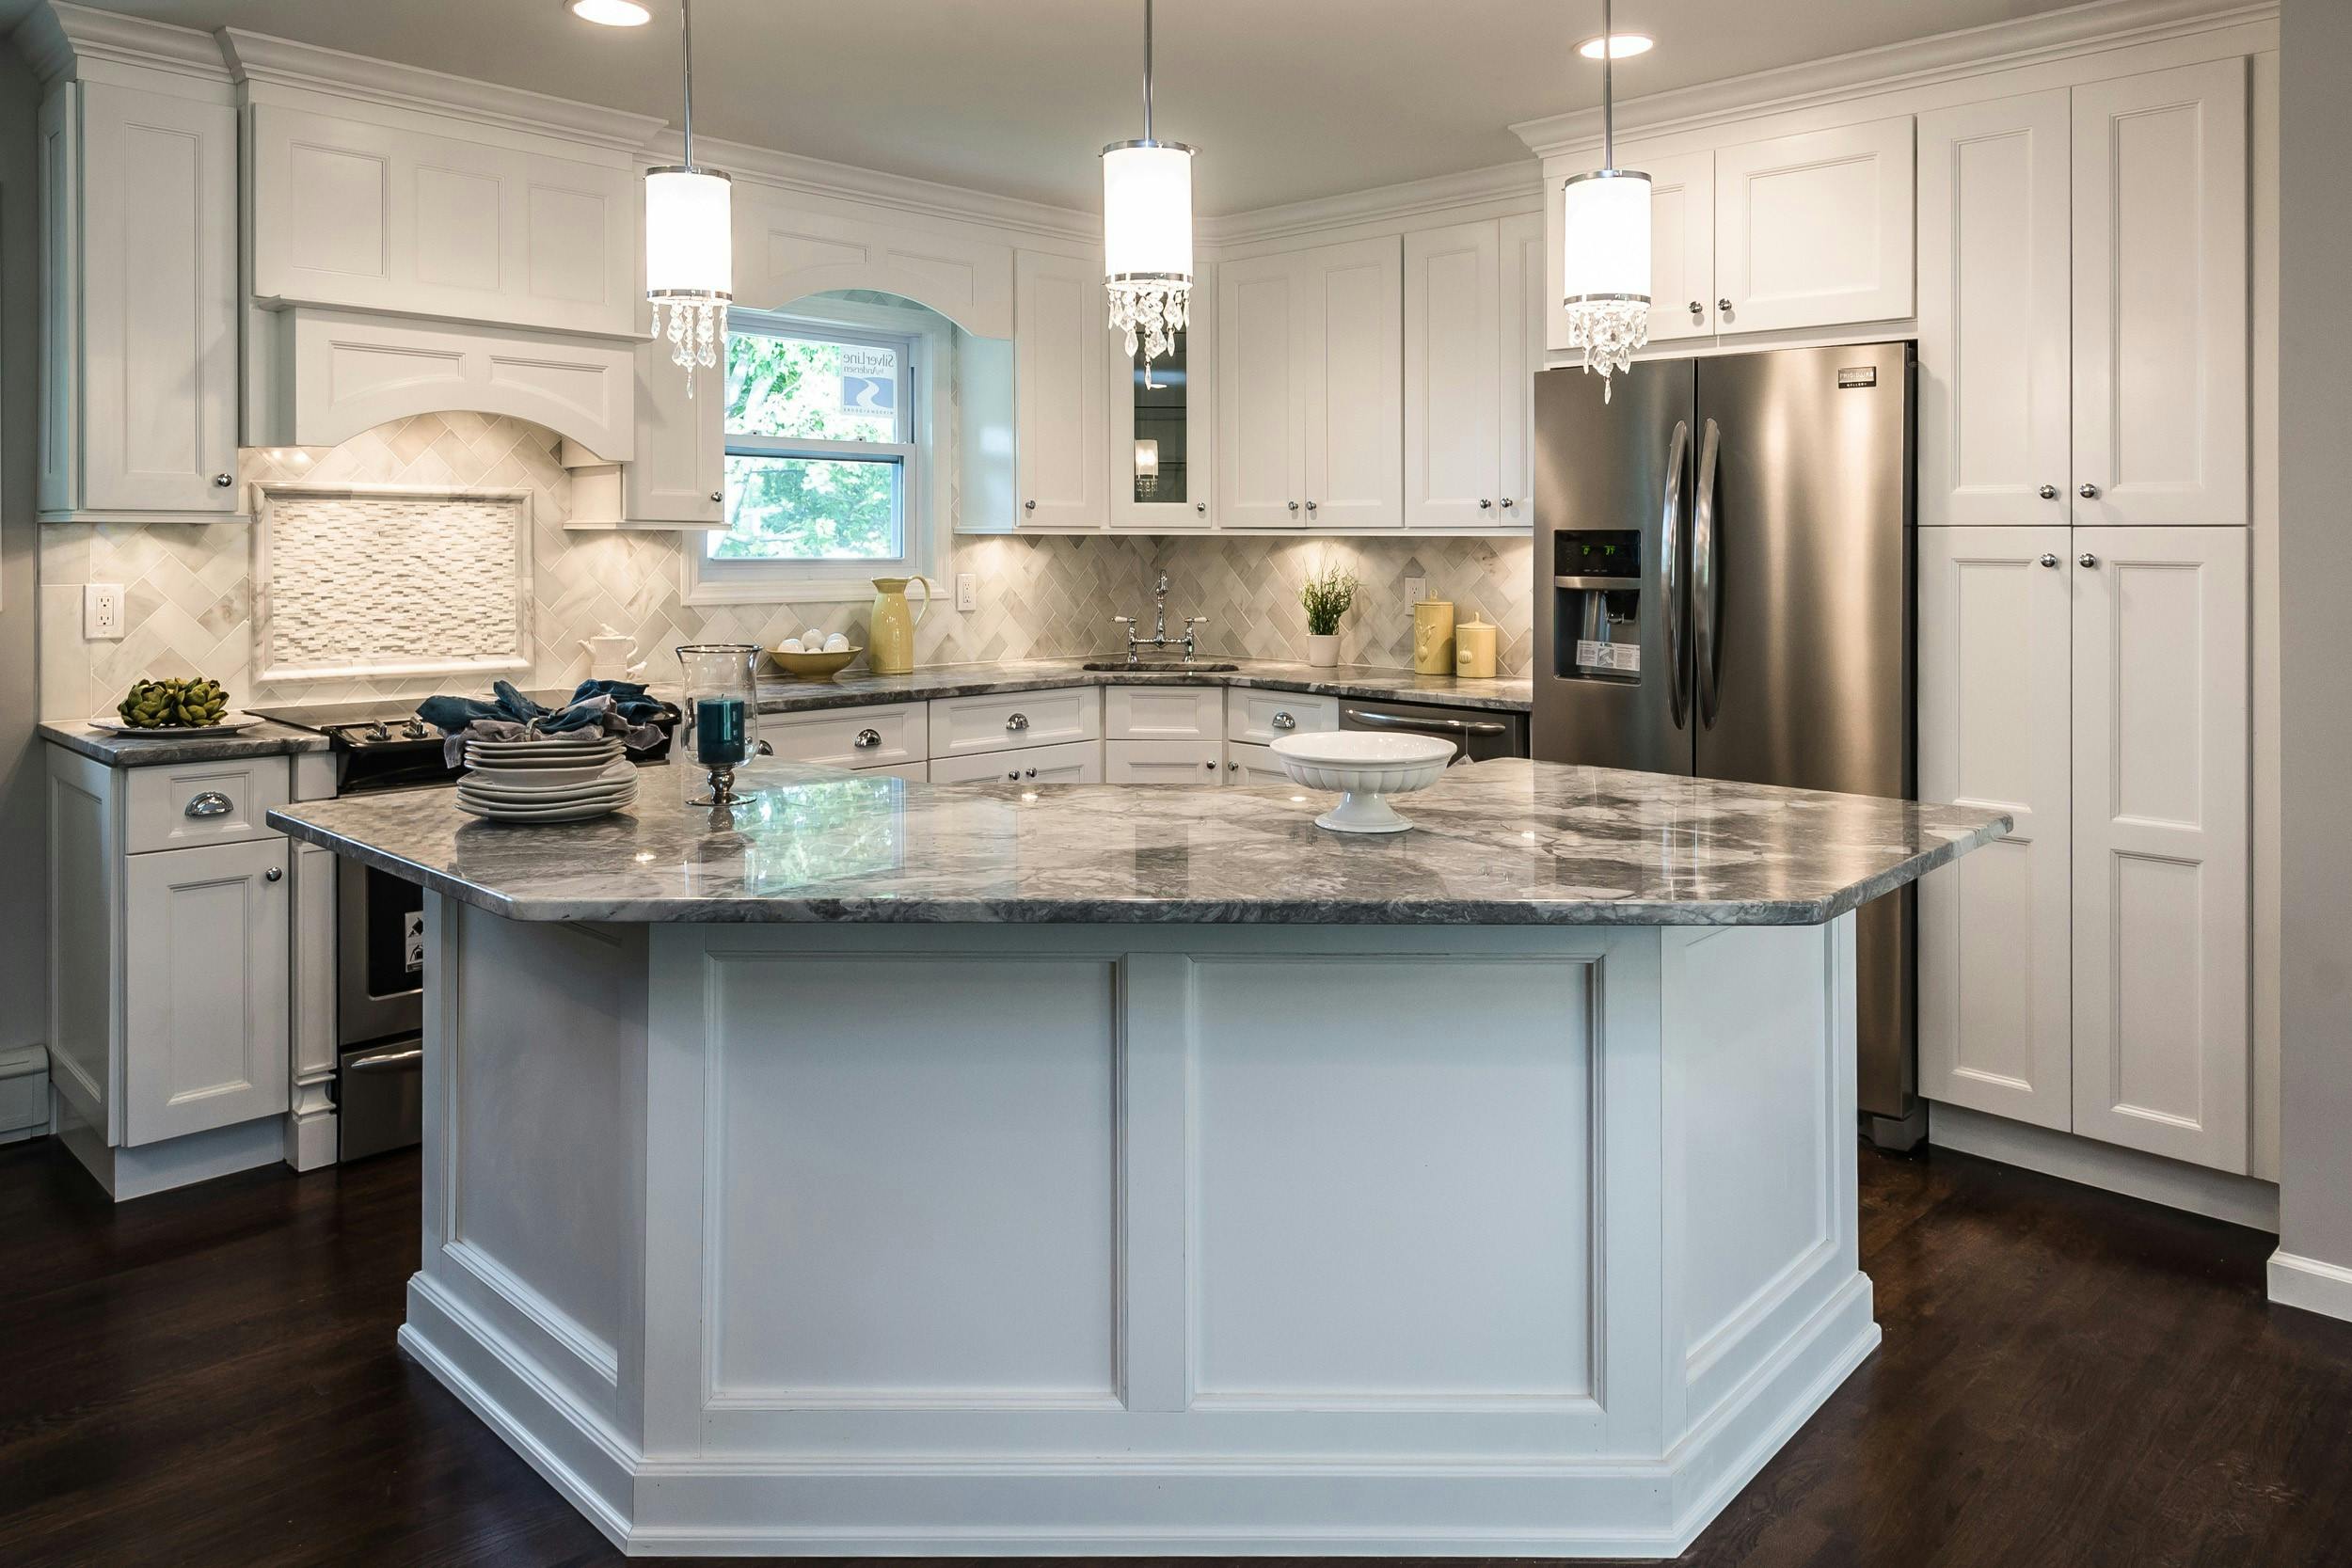 Kitchen Countertops And Cabinets, White Cabinets With White Countertops